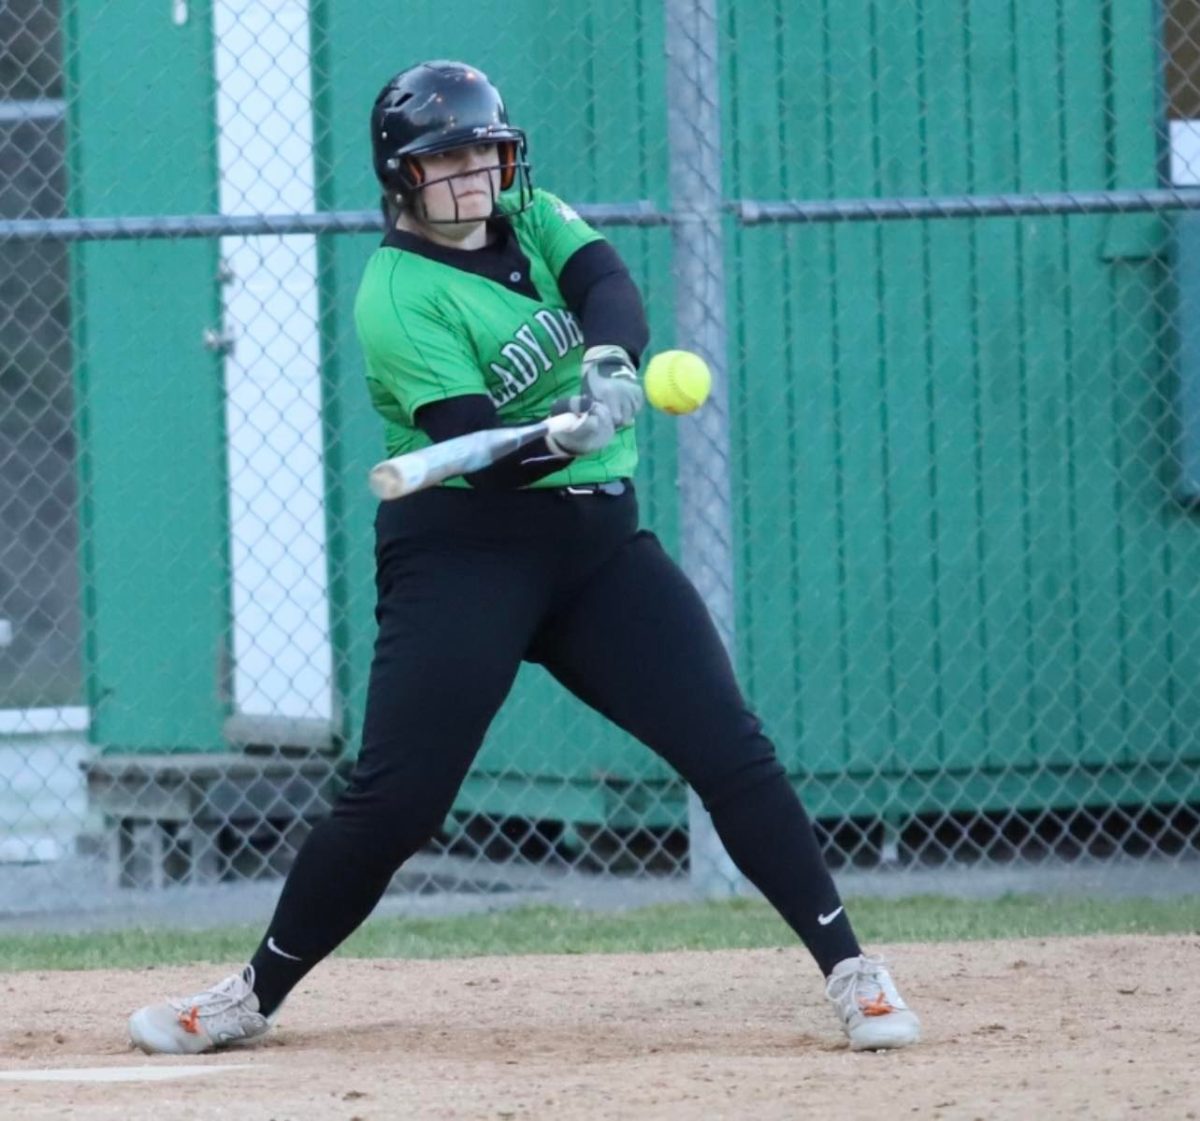 Harlan first baseman Abbi Fields drove in five runs with a homer and single as the Lady Dragons rolled to an 11-1 win over Powell County on Saturday.